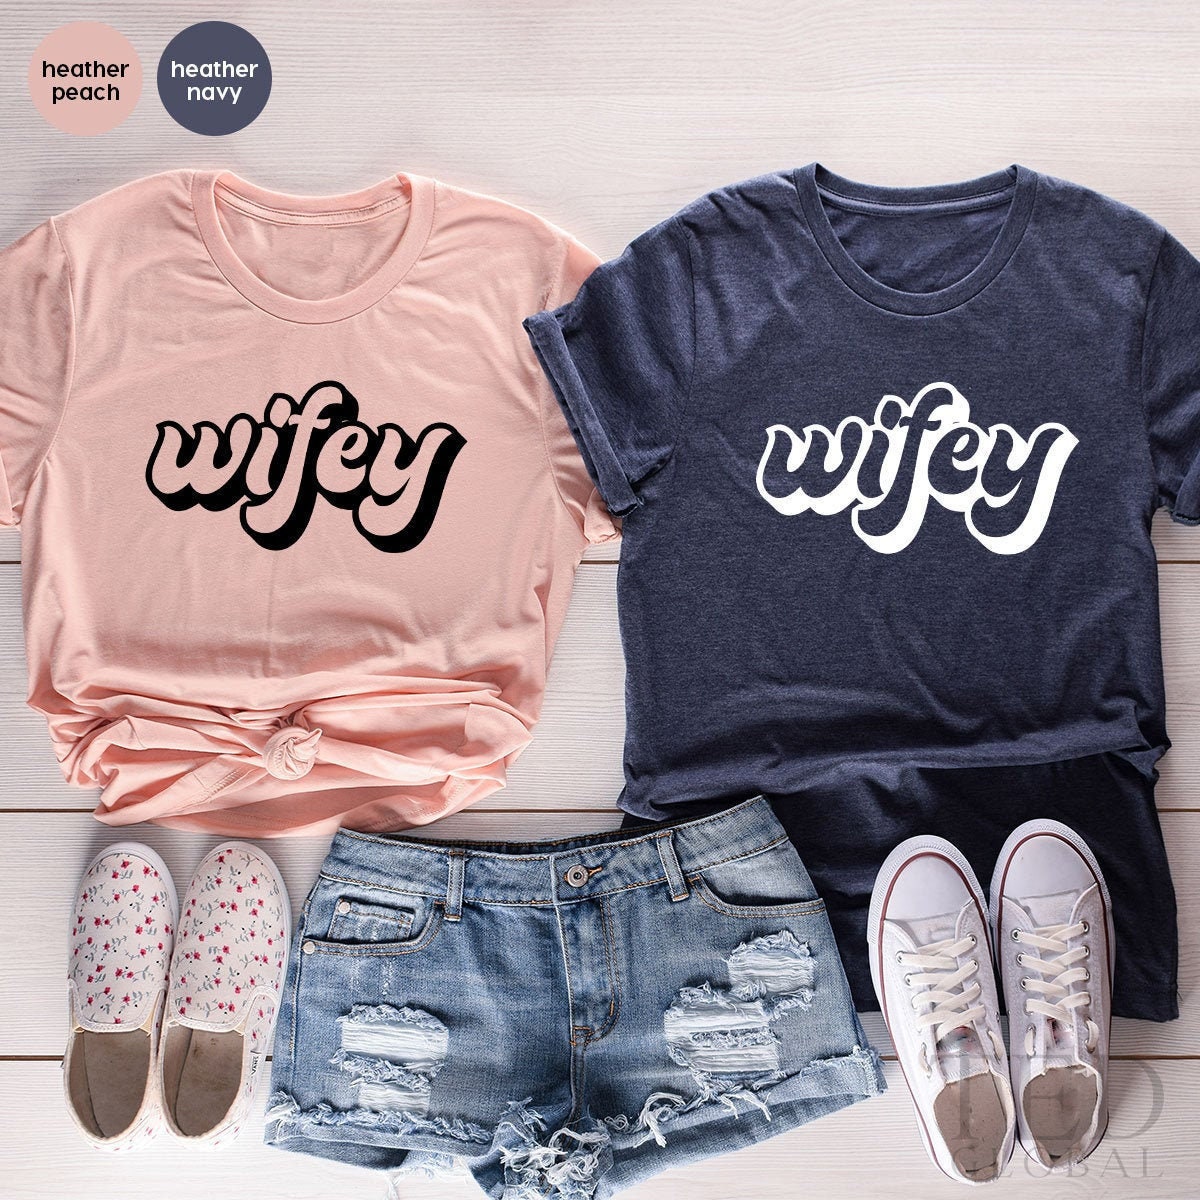 Retro Wifey T Shirt, Engagement TShirt, Just Married Shirts, New Wife Gift, Wedding Party T-Shirt, Bridal Gift Engagement, Wifey Shirt - Fastdeliverytees.com